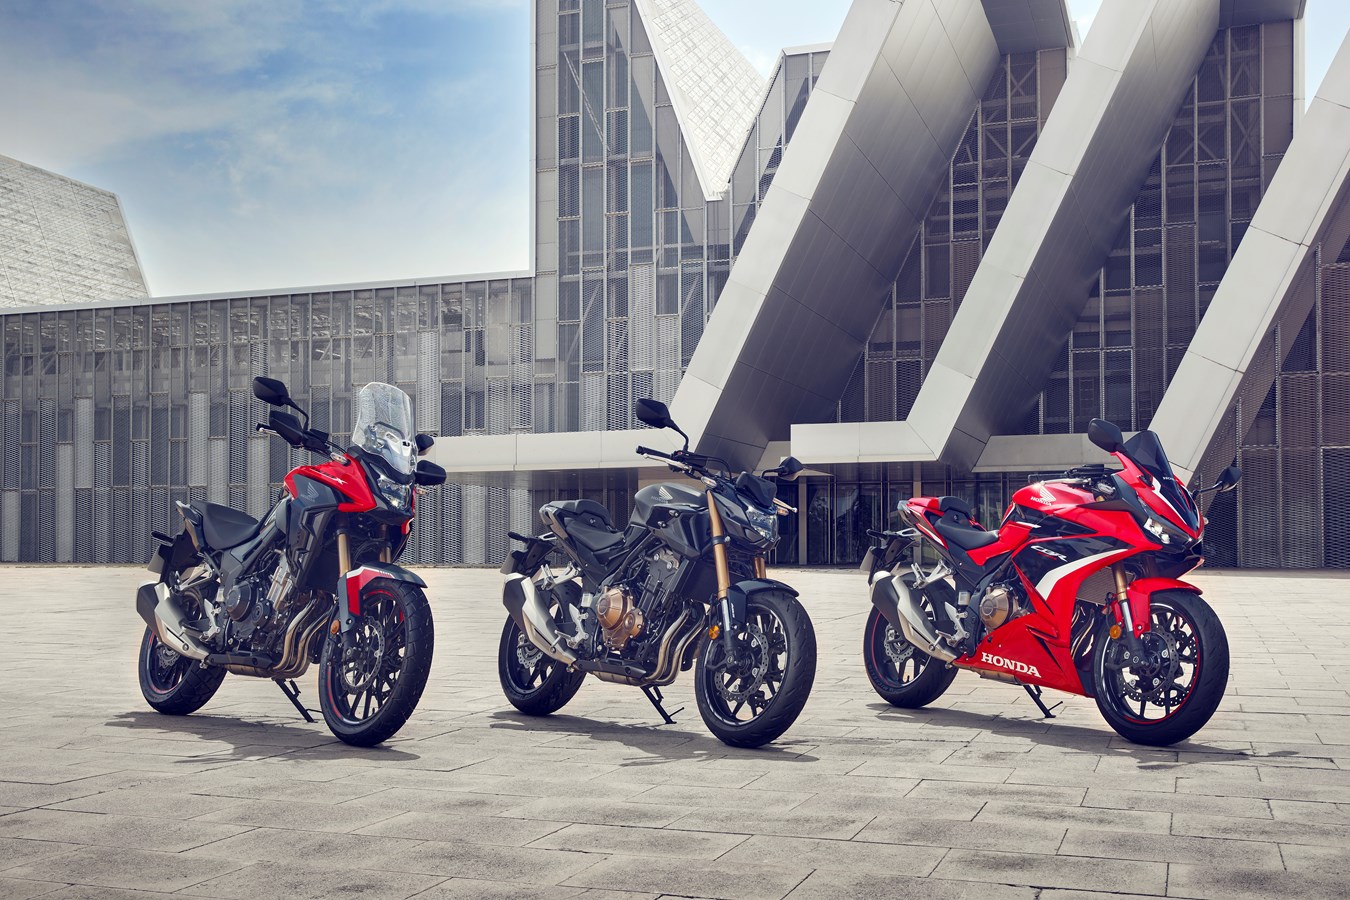 Honda’s trio of A2 licence-friendly 500cc machines receive strong performance-focused updates for 2022 year model